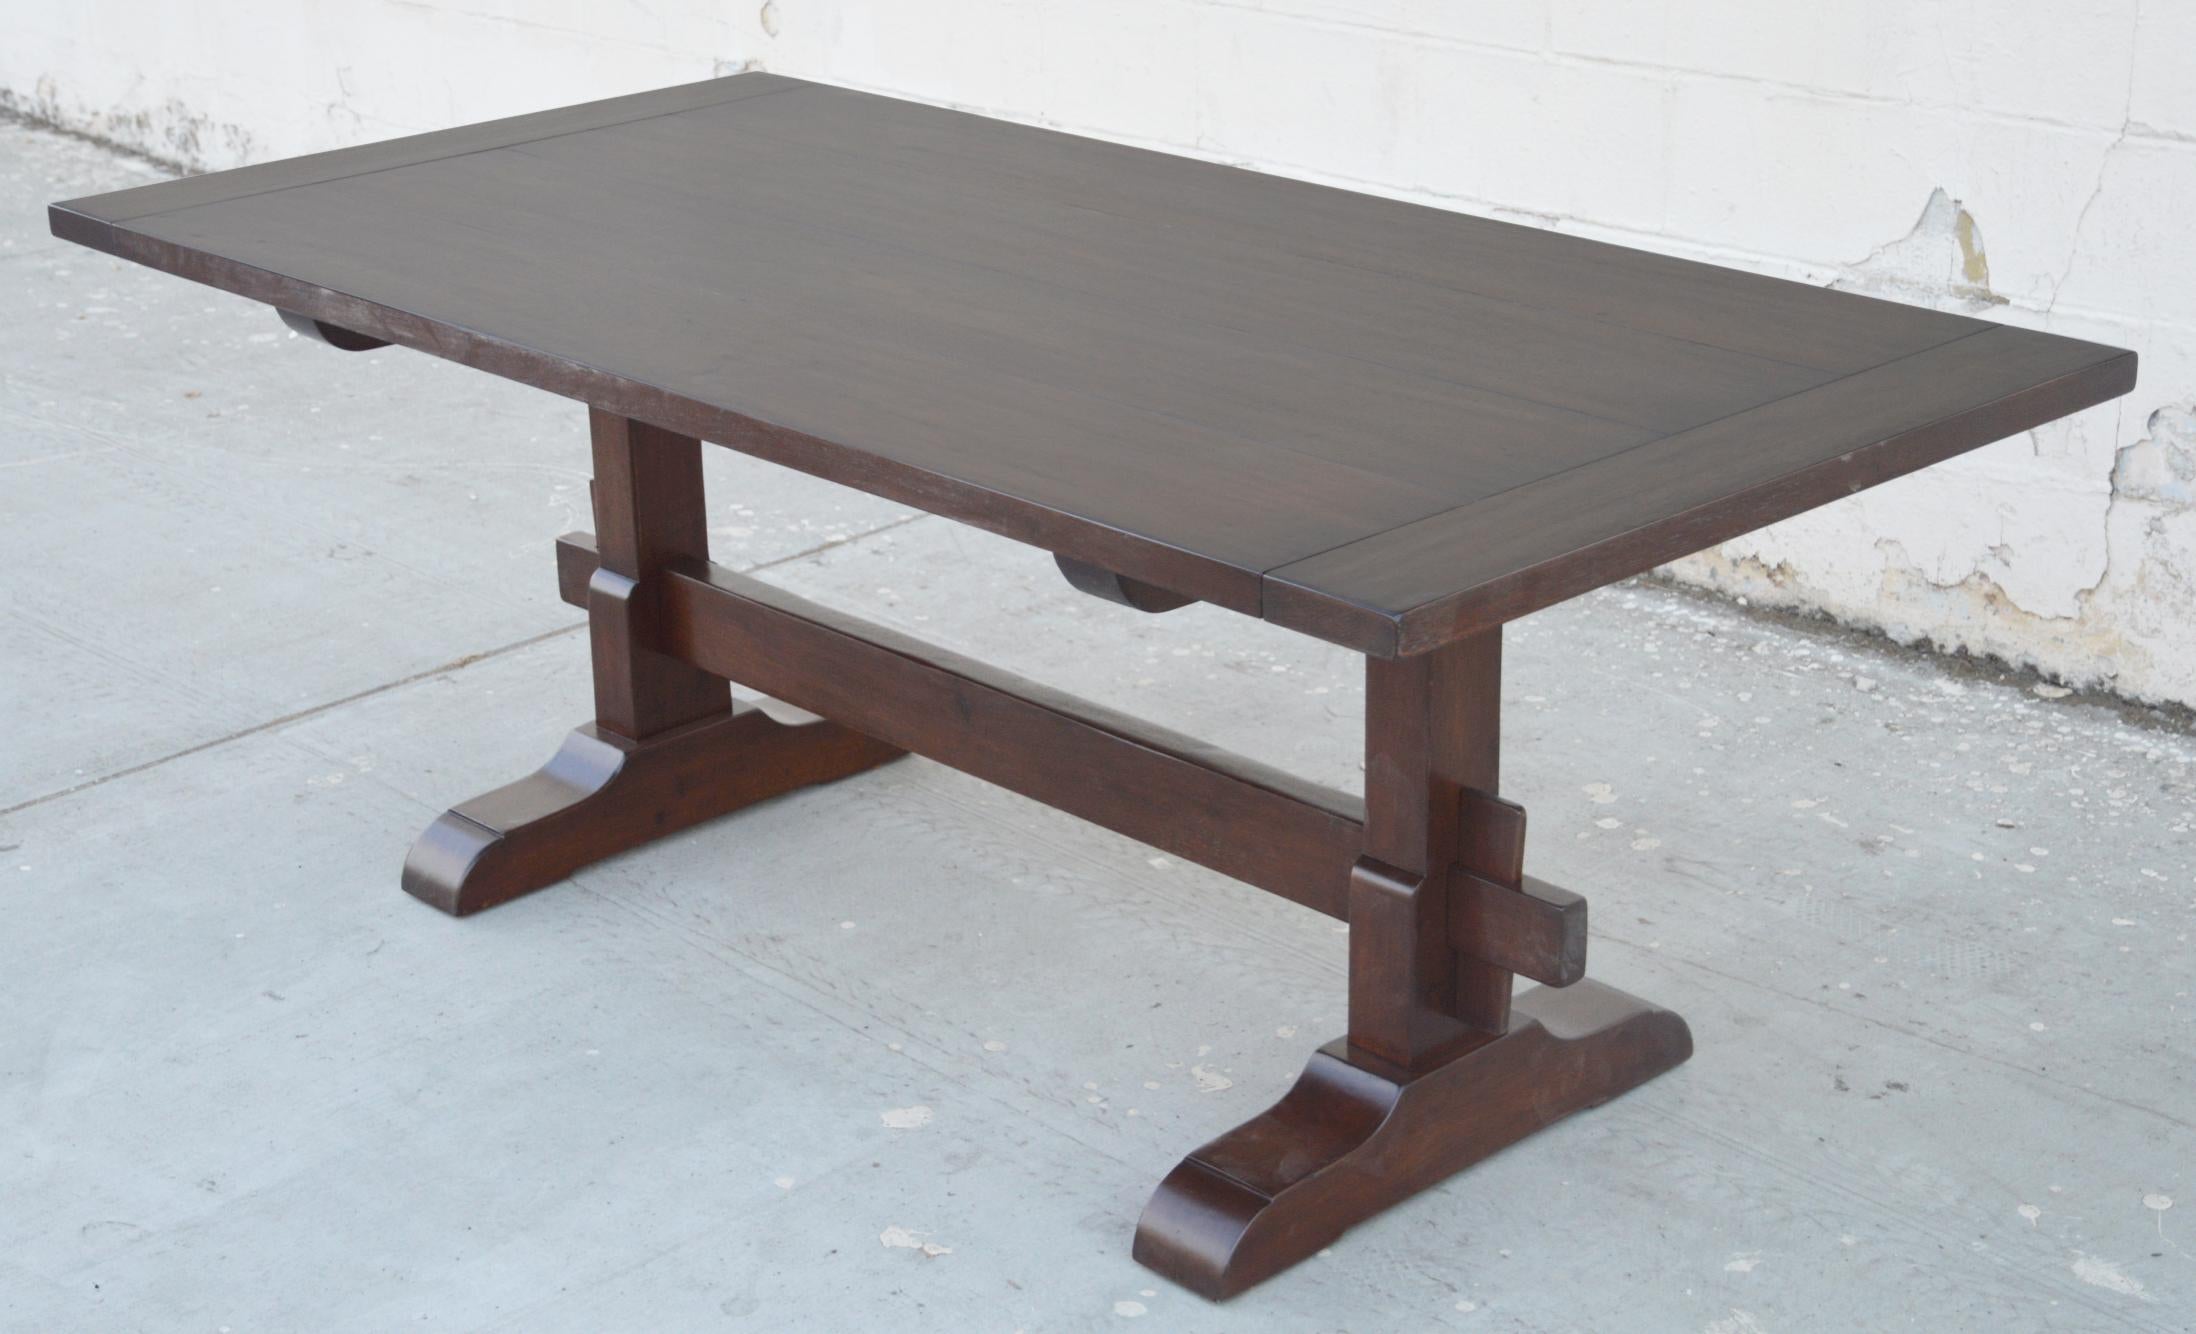 This walnut trestle table is seen here in 90